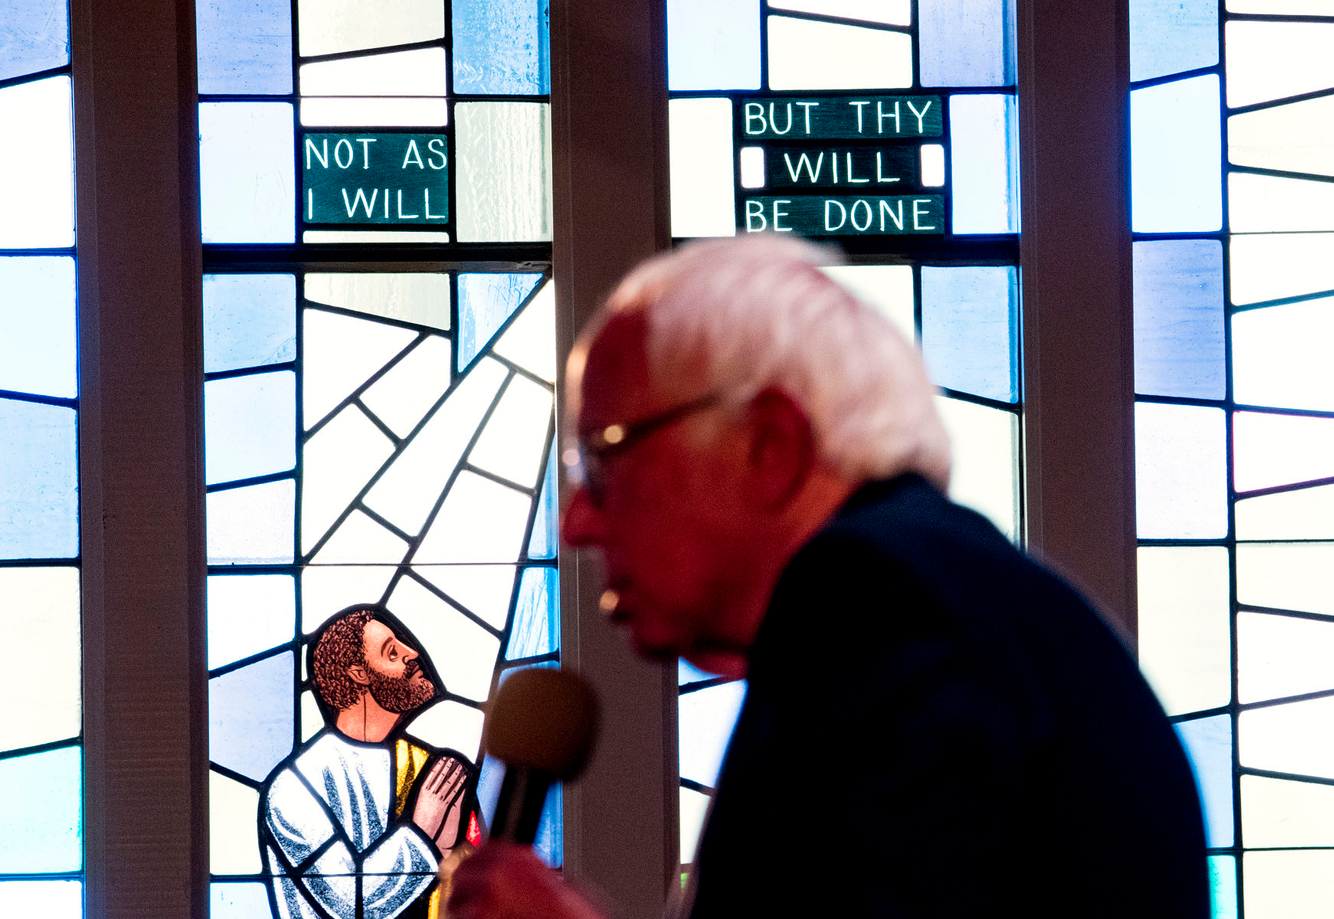 Bernie Sanders speaks at a church during a campaign event in Oakland, California.